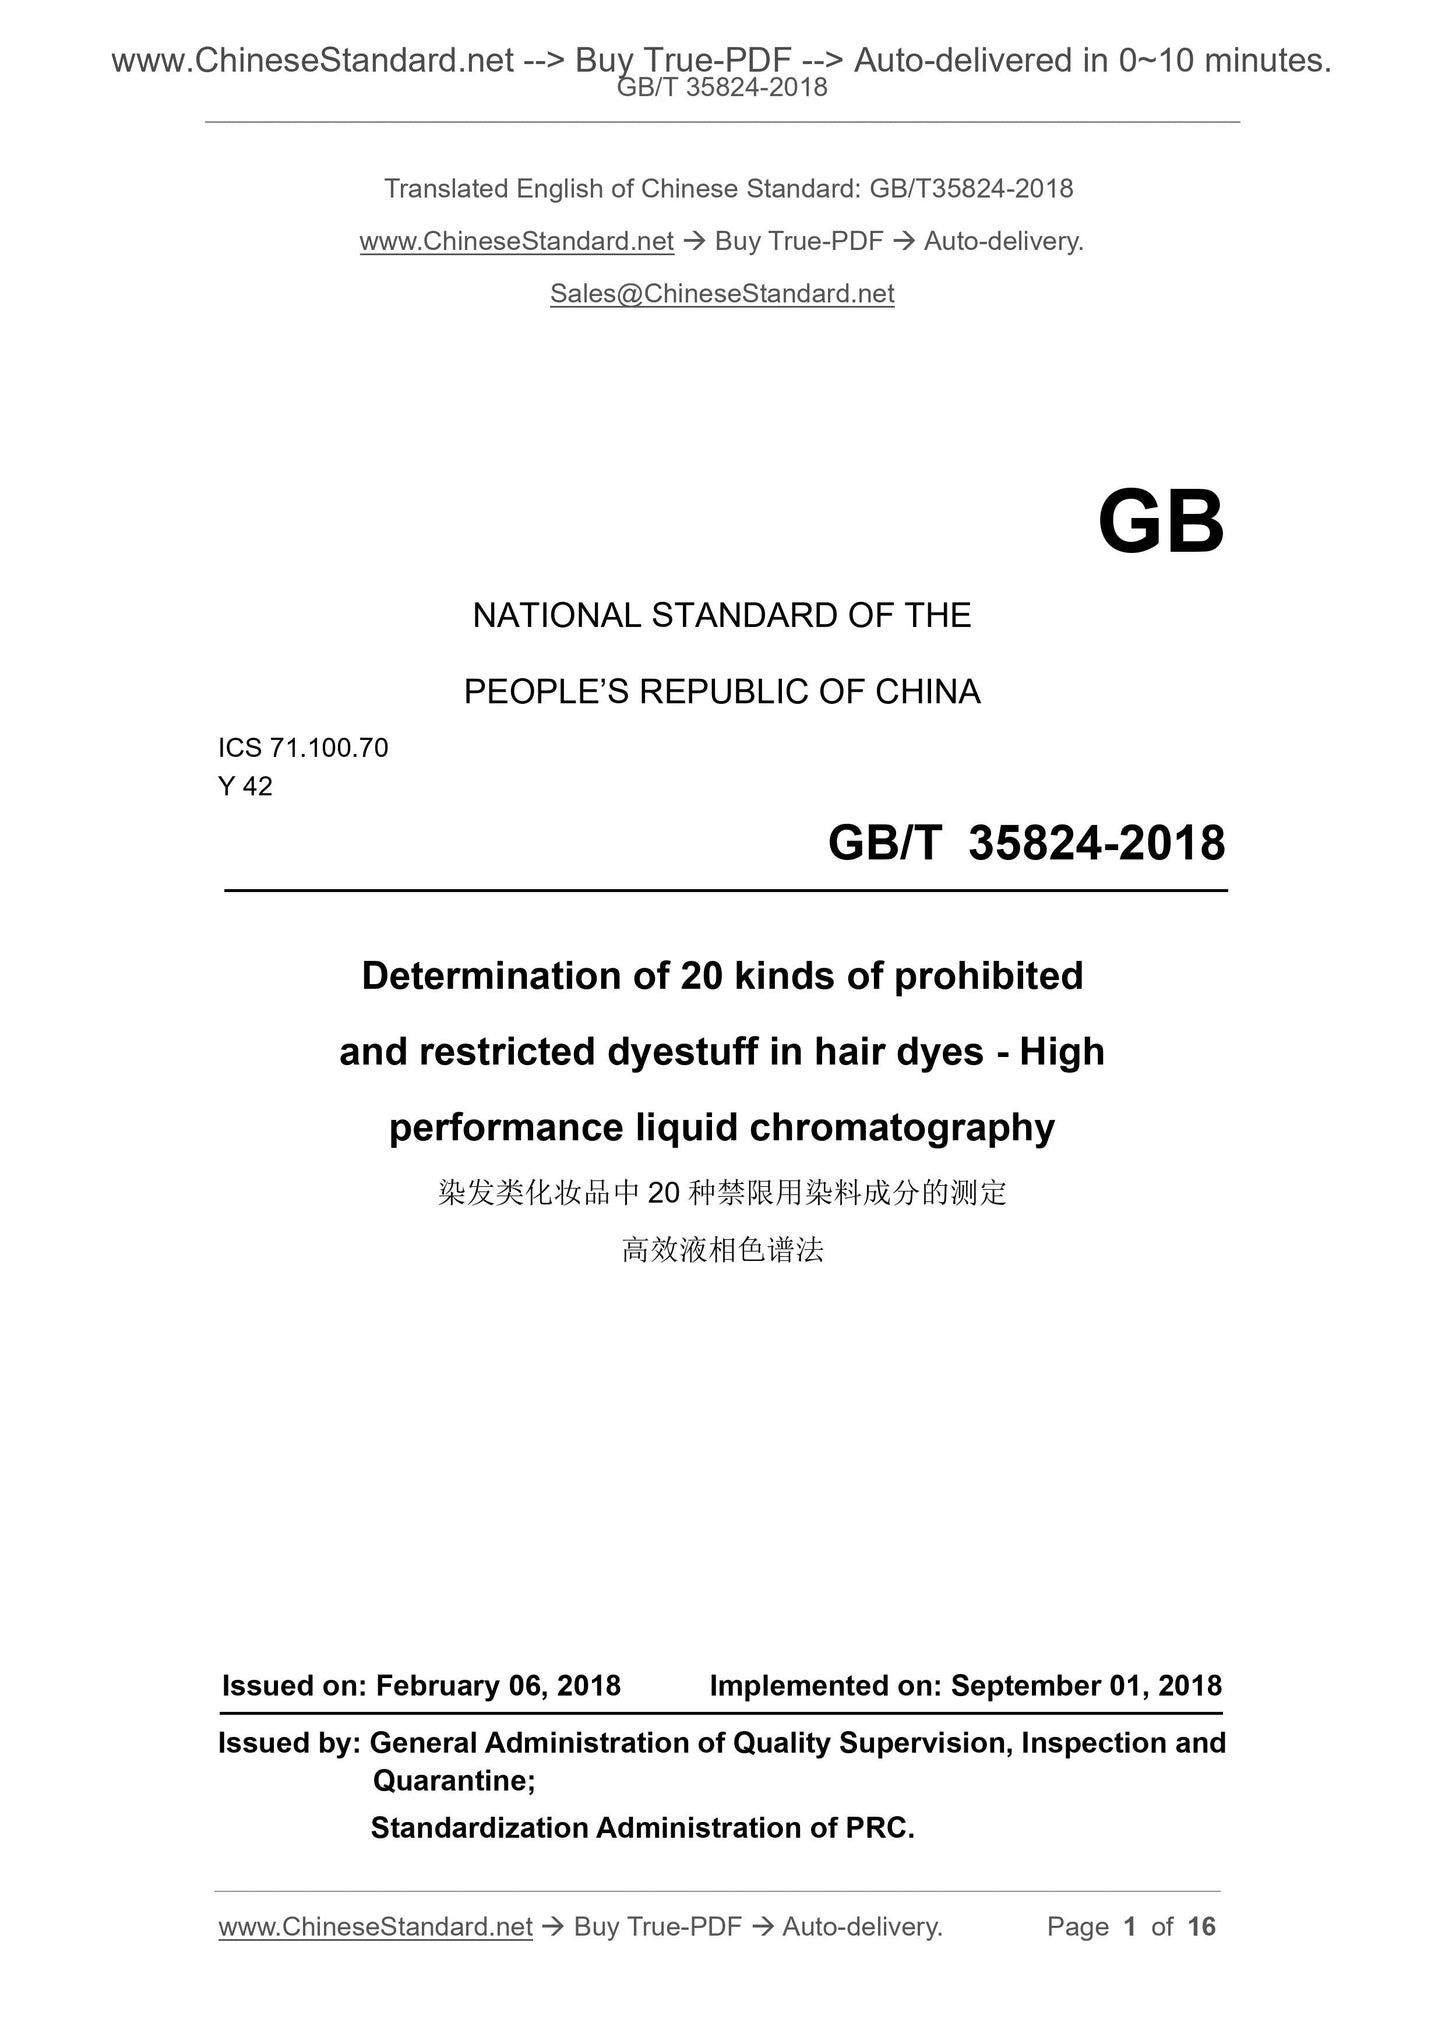 GB/T 35824-2018 Page 1